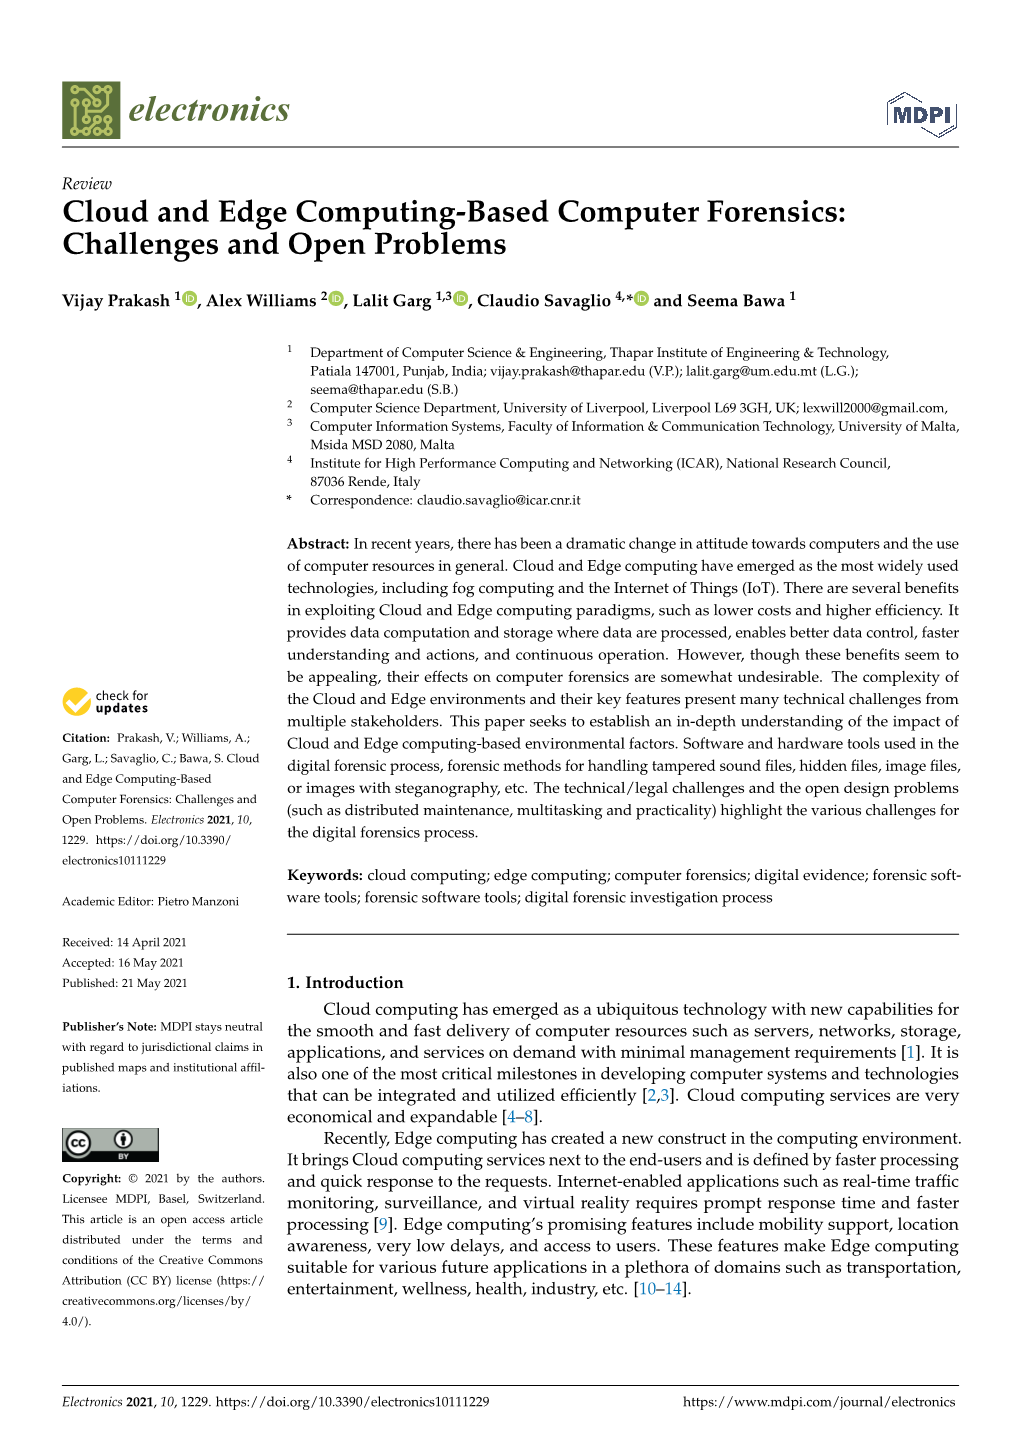 Cloud and Edge Computing-Based Computer Forensics: Challenges and Open Problems